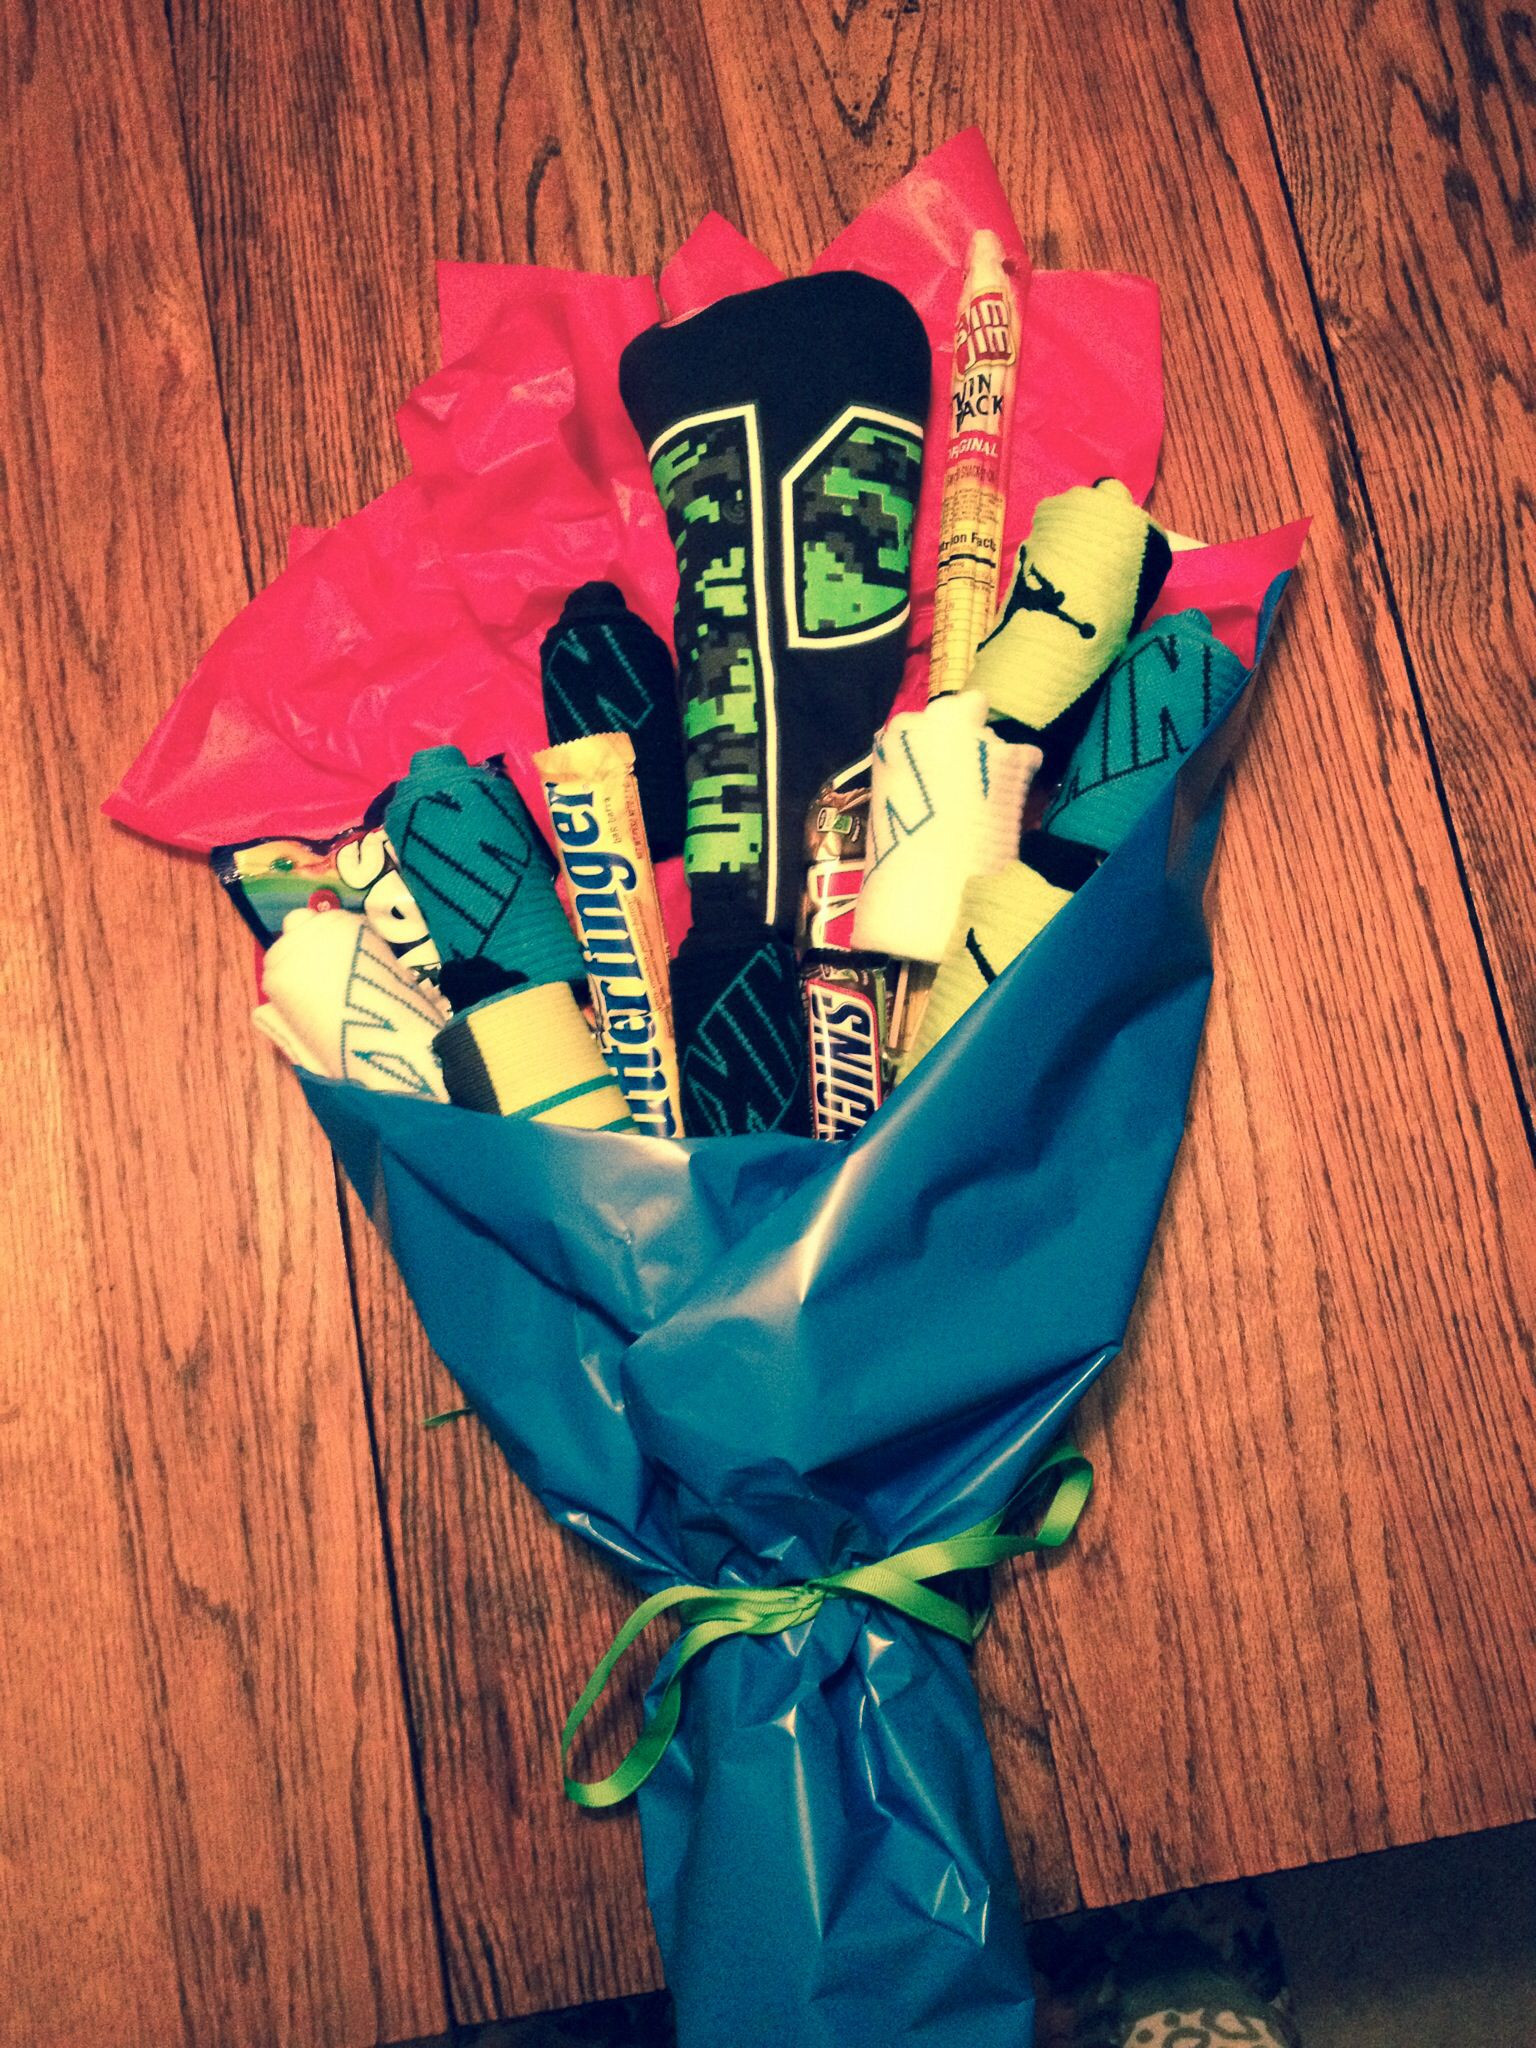 Boy Valentine Gift Ideas
 Nike elite socks bouquet for my 12 year old with treats